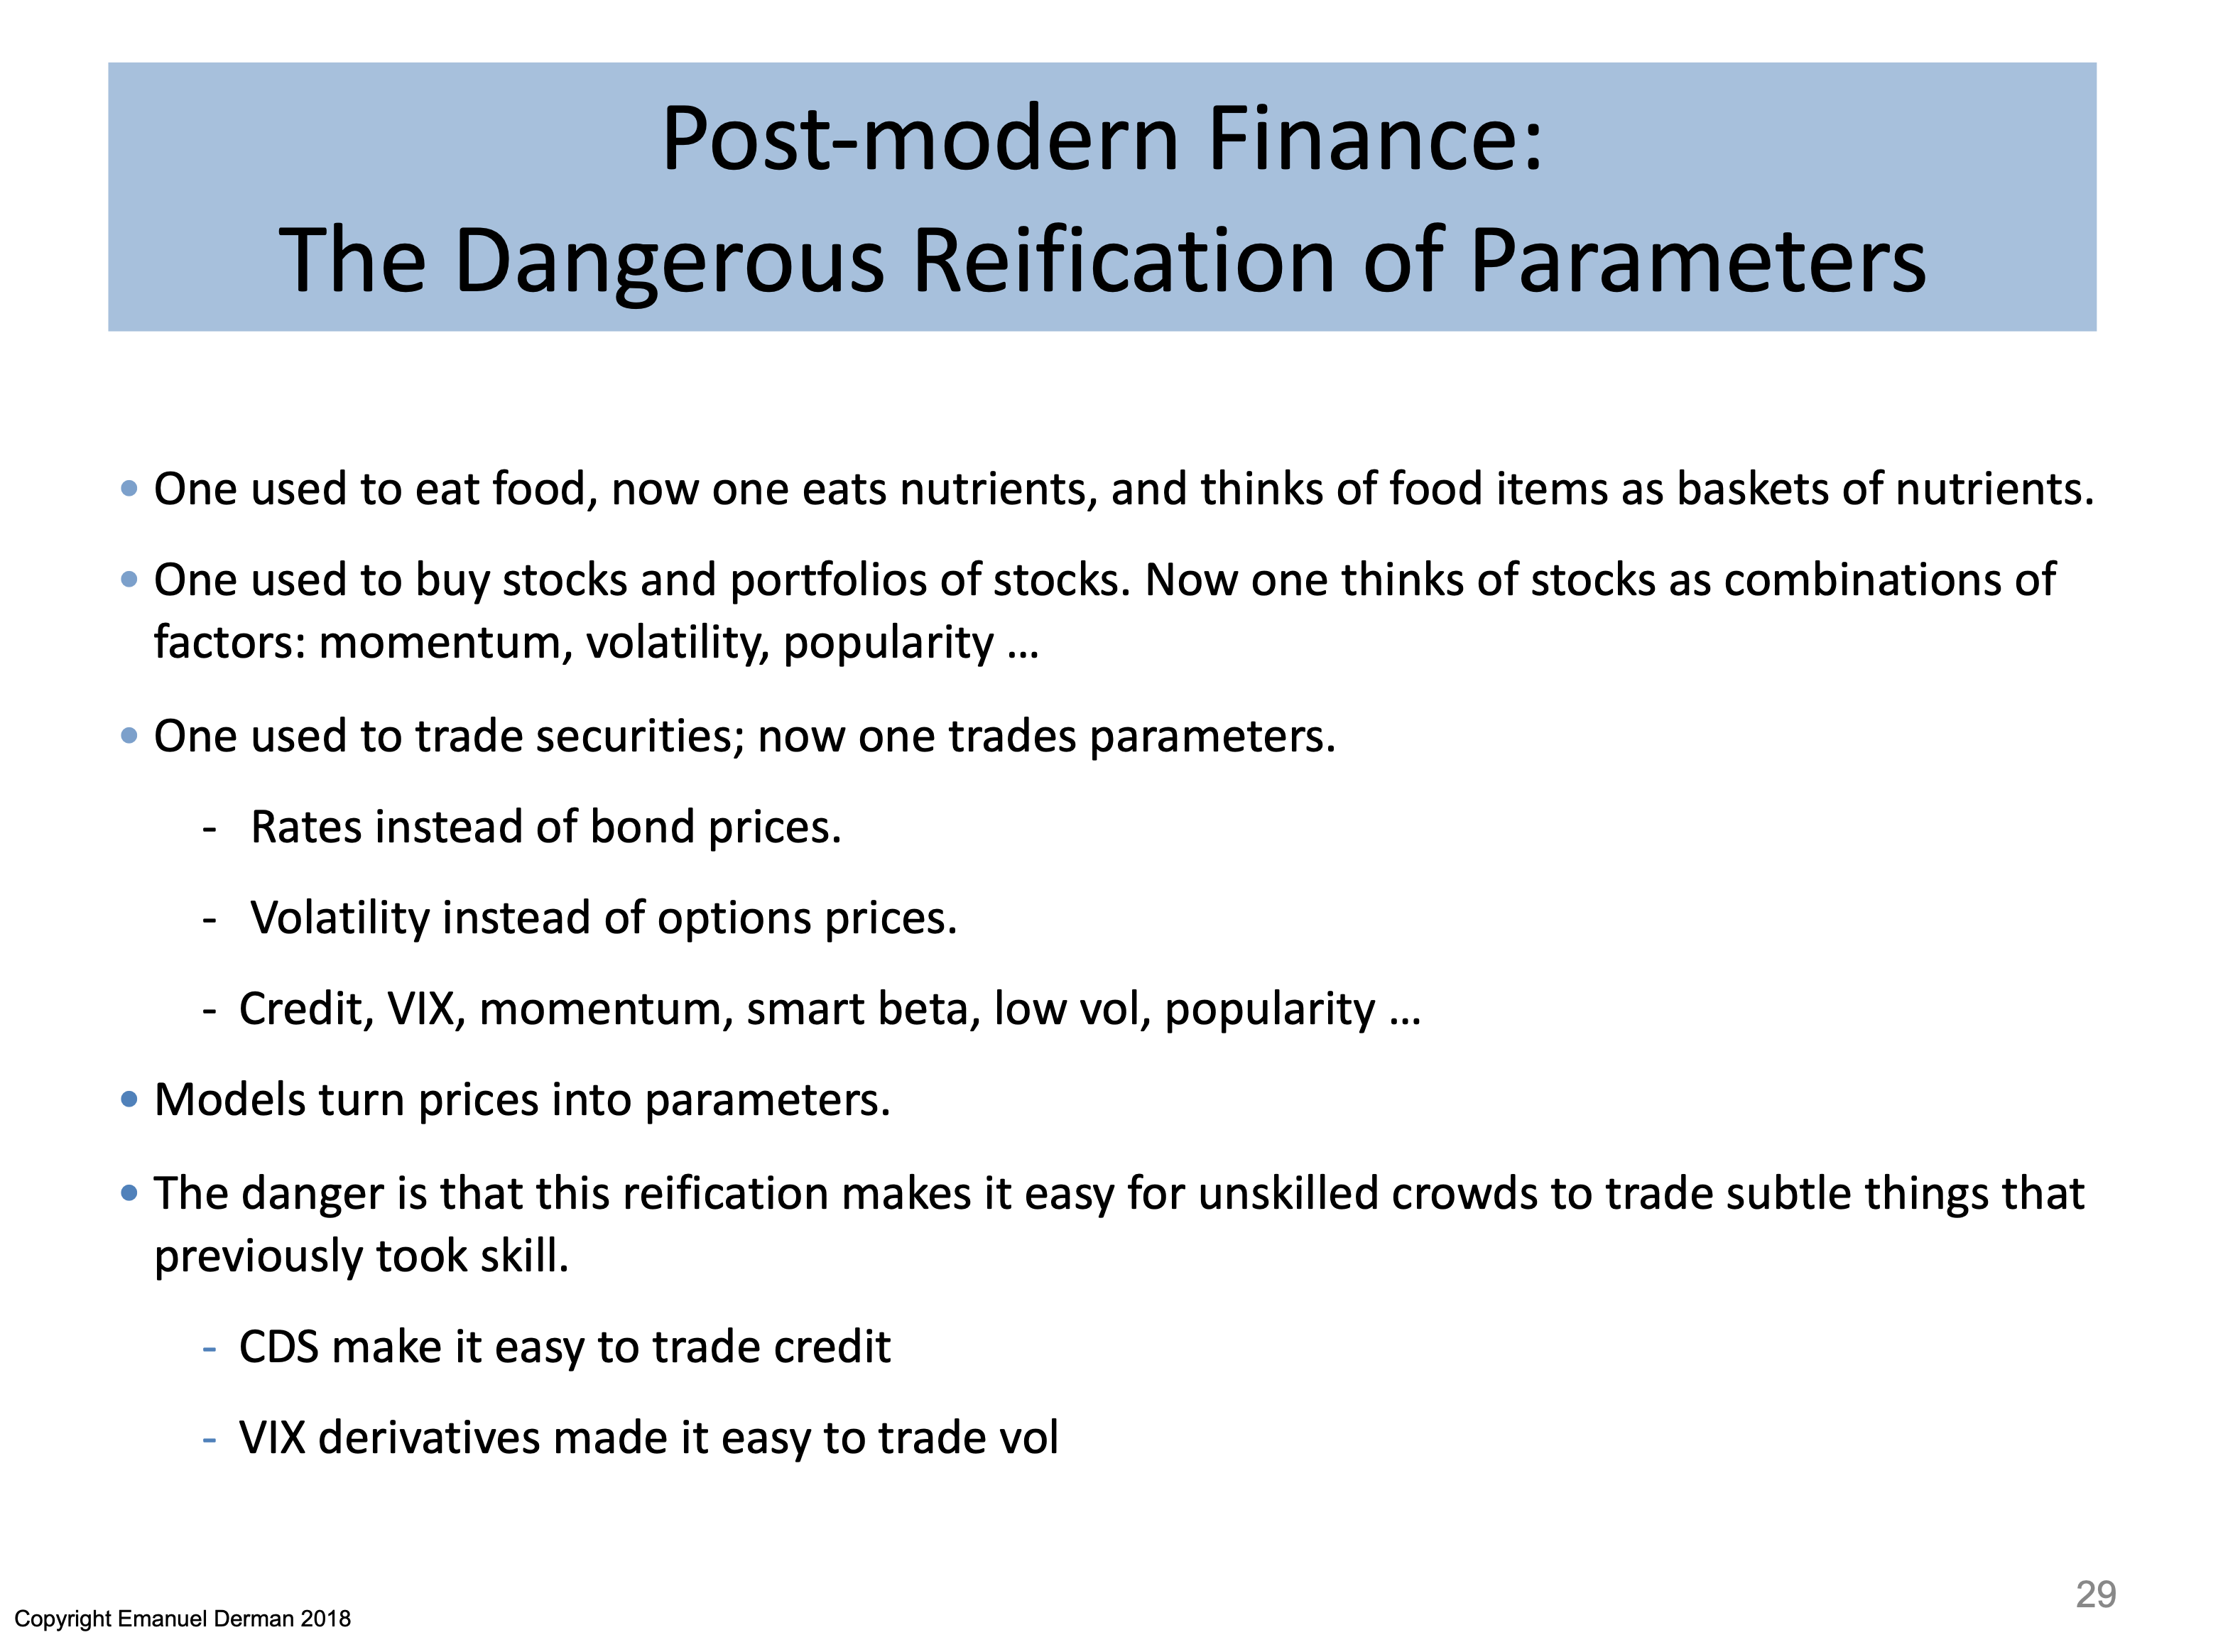 How does this transition from asset classes and securities to factors and parameters affect markets? Source: Emanuel Derman